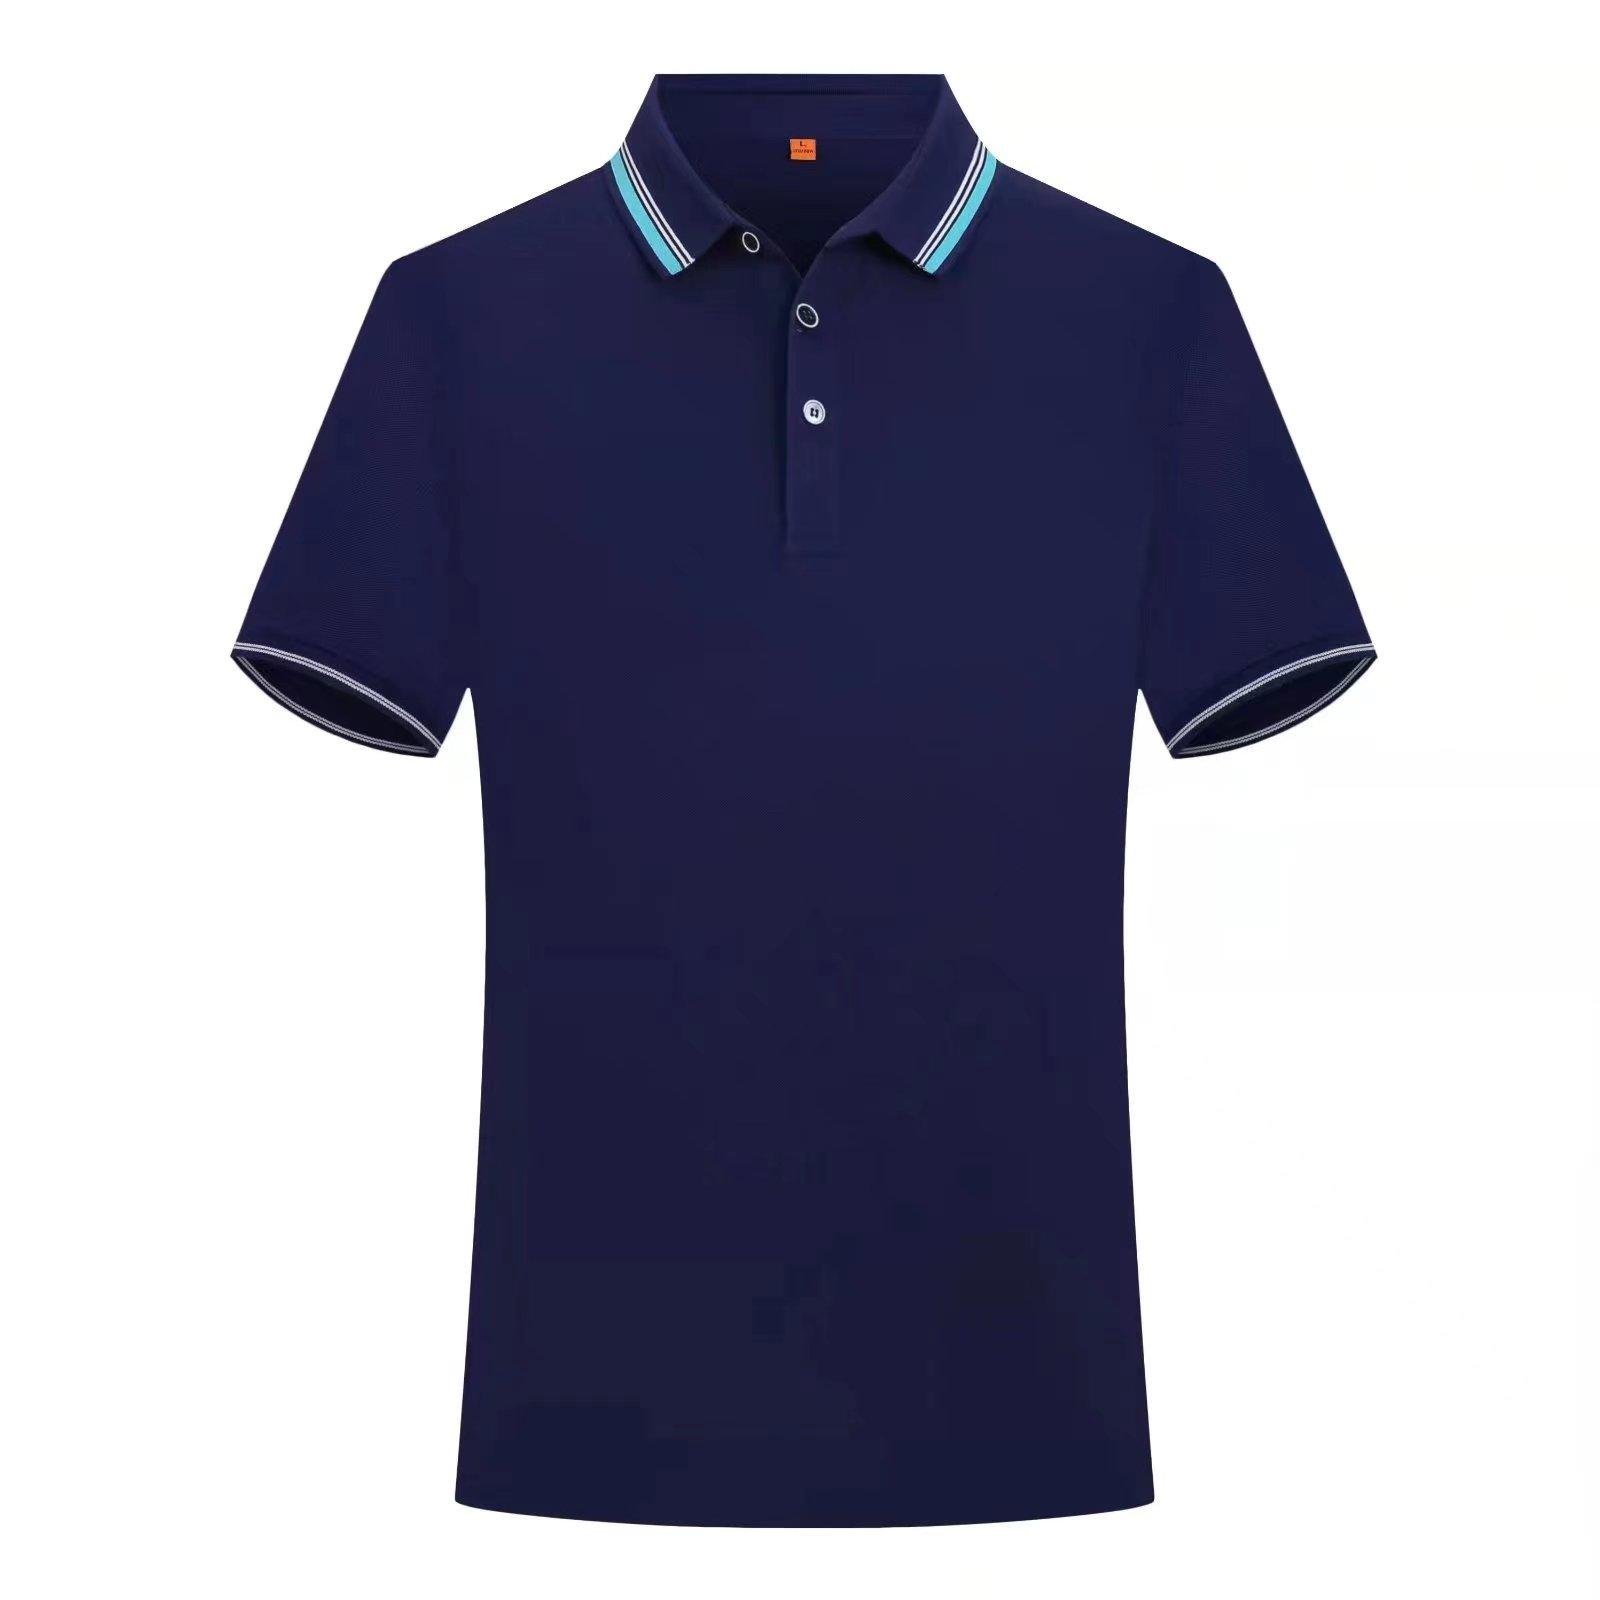 High Quality Cotton Polyester Multi-color Custom Printing Embroidery Polo shirt 4